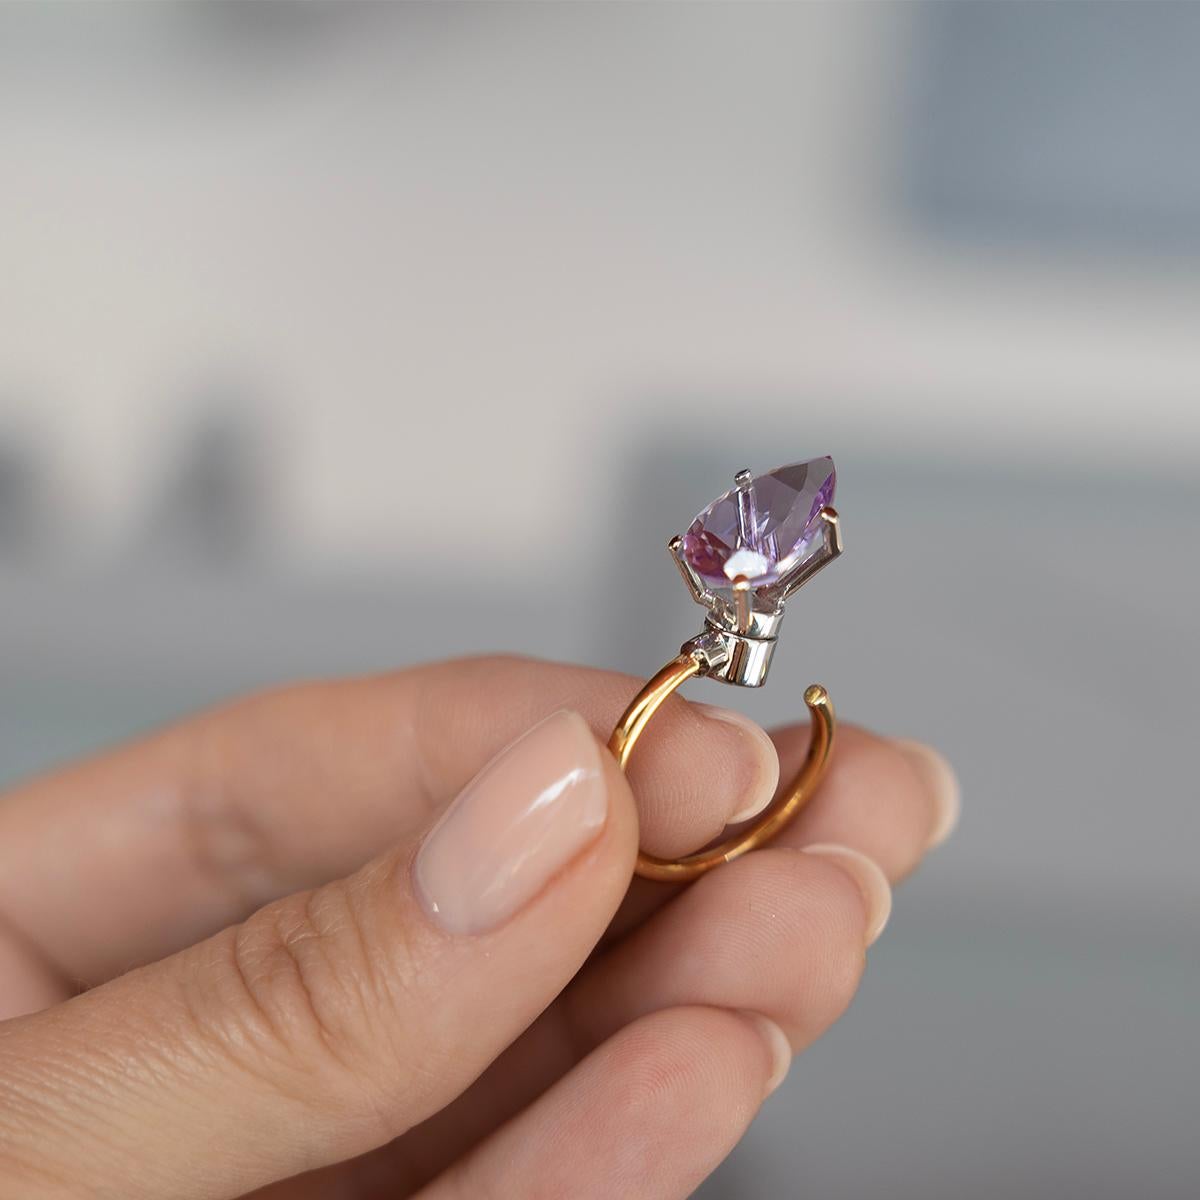 Women's or Men's Pink Amethyst, Pear Cut  '4.5 Carat' in a Golden Yellow Ring, 18k  For Sale